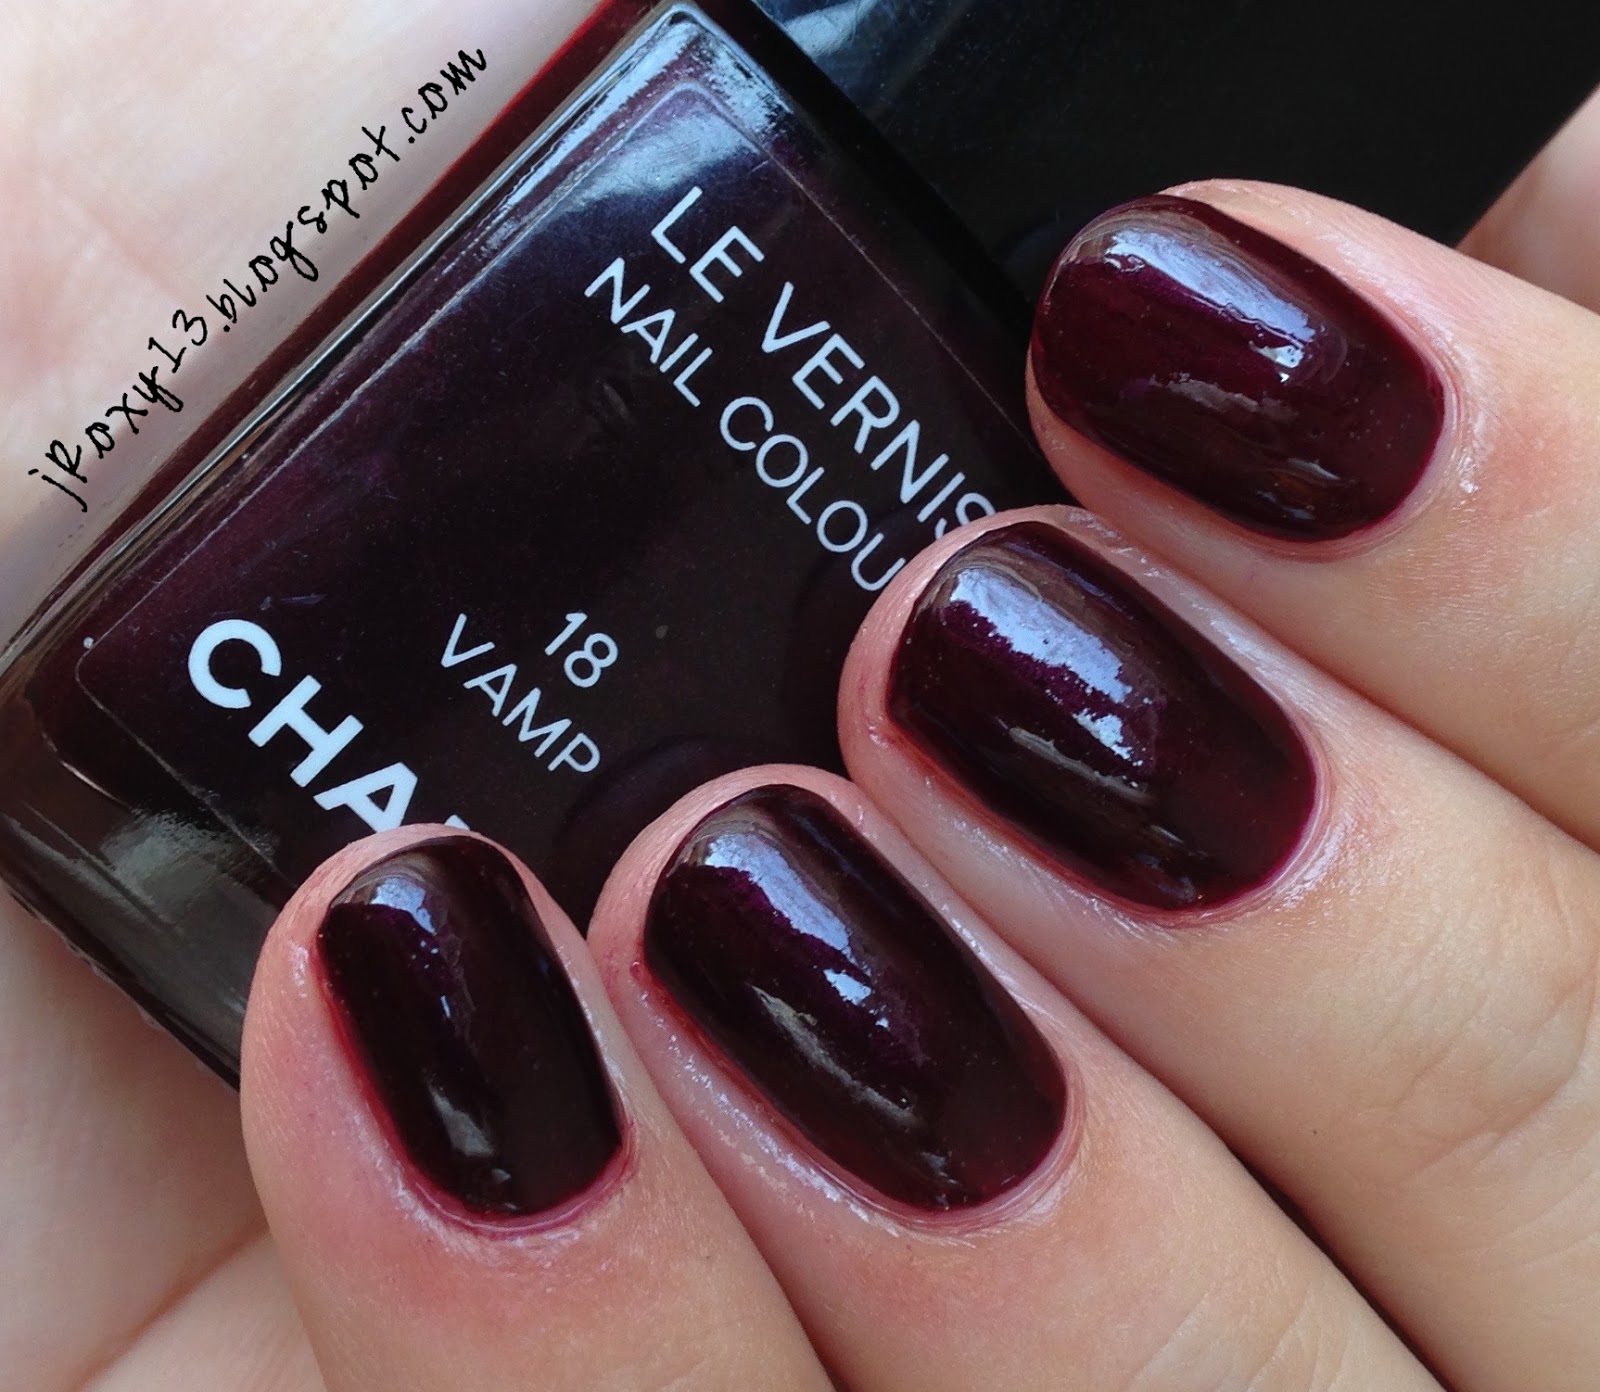 Chanel Taboo #583 Le Vernis - The Beauty Look Book